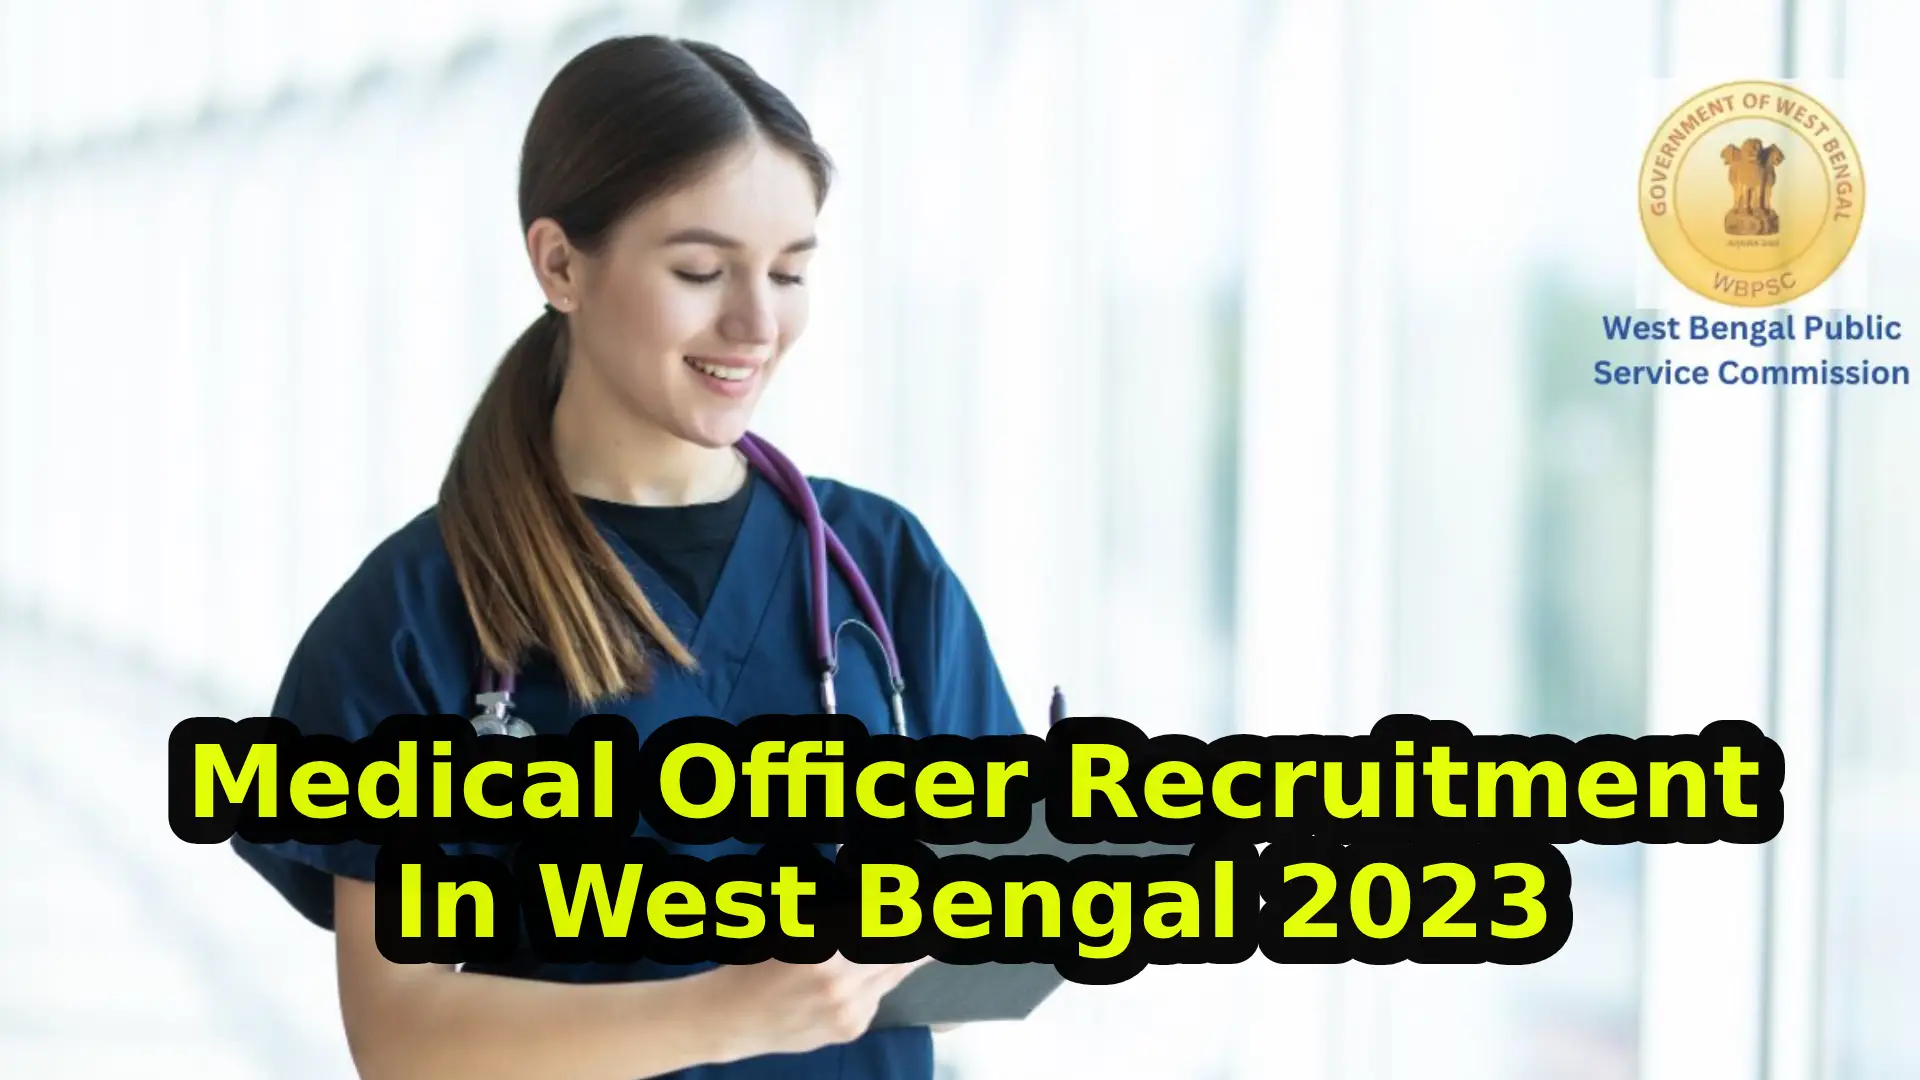 Medical Officer Recruitment In West Bengal 2023